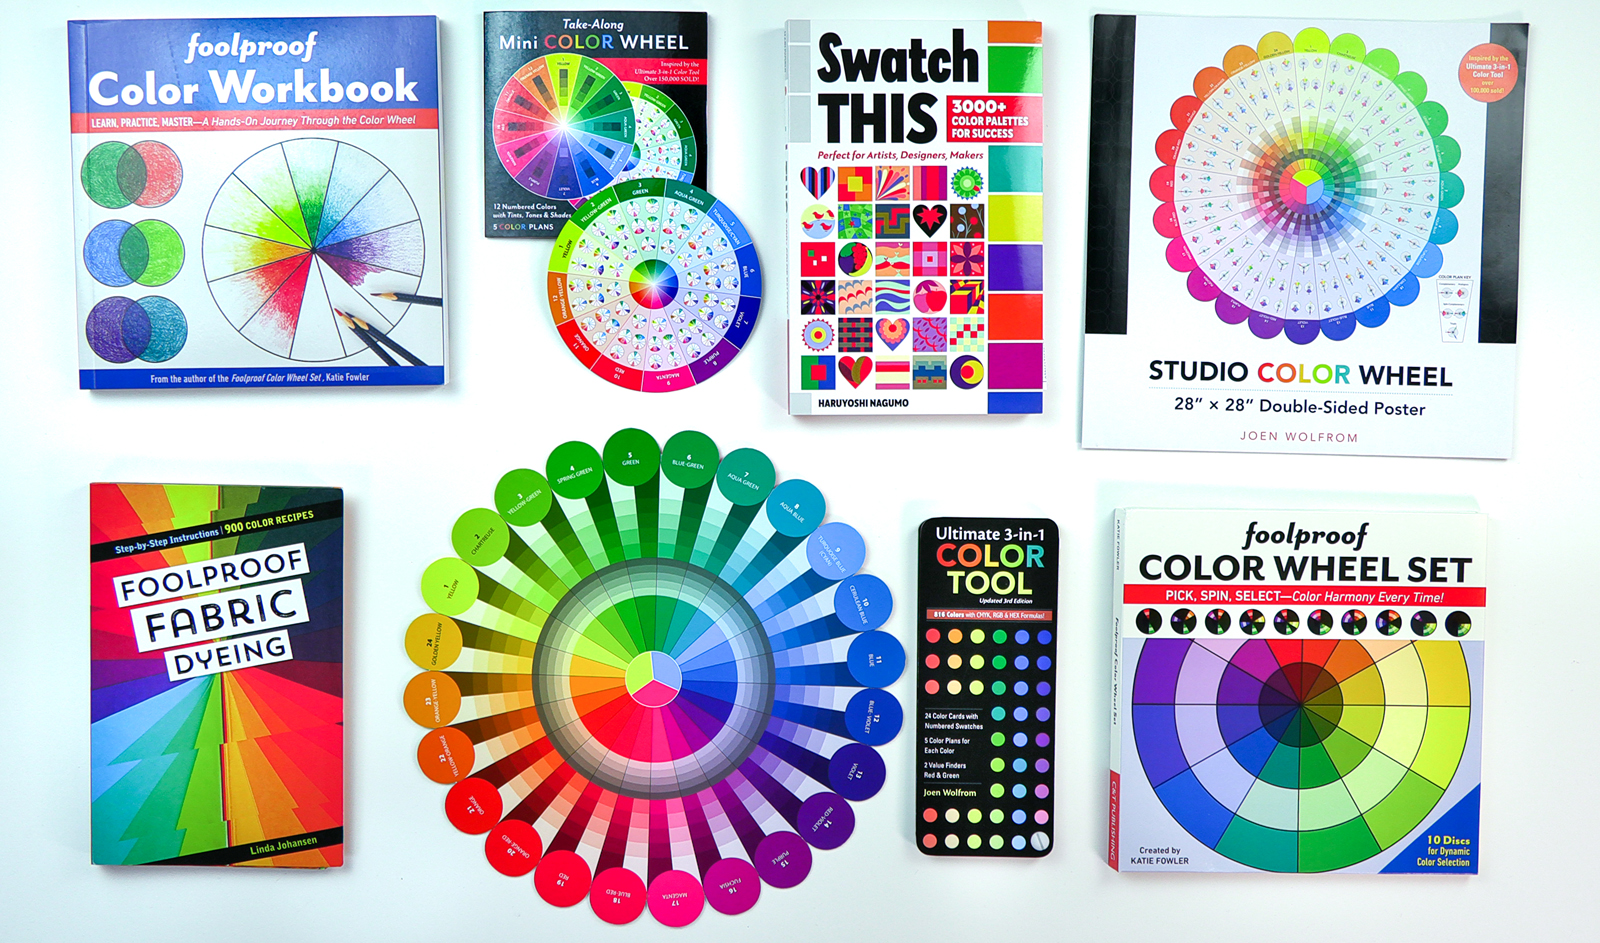 Studio Color Wheel: 28 X 28 Double-sided Poster [Book]